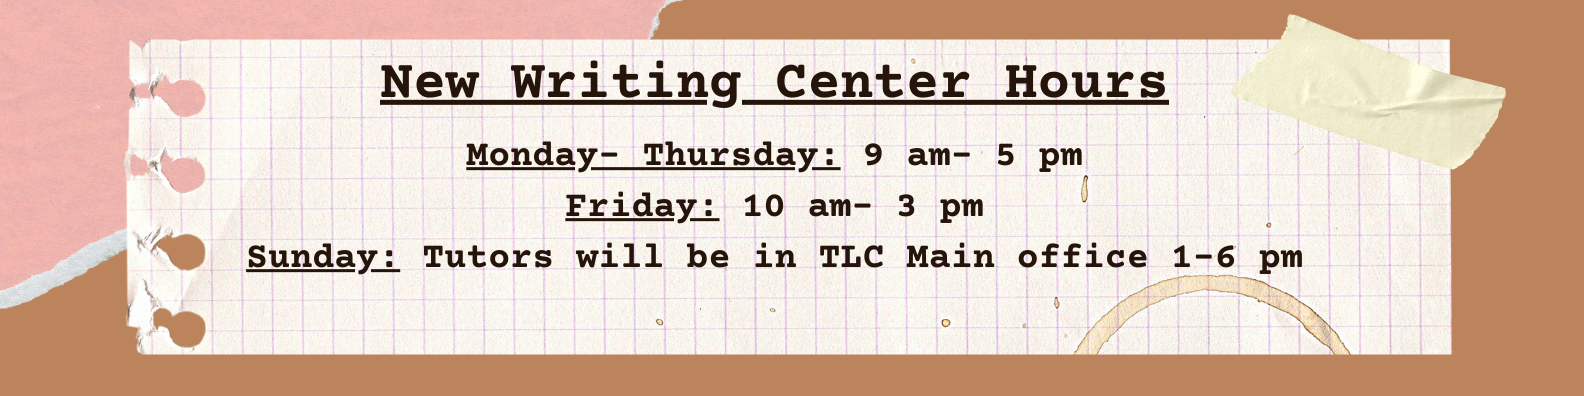 new-writing-center-hours-banner.png